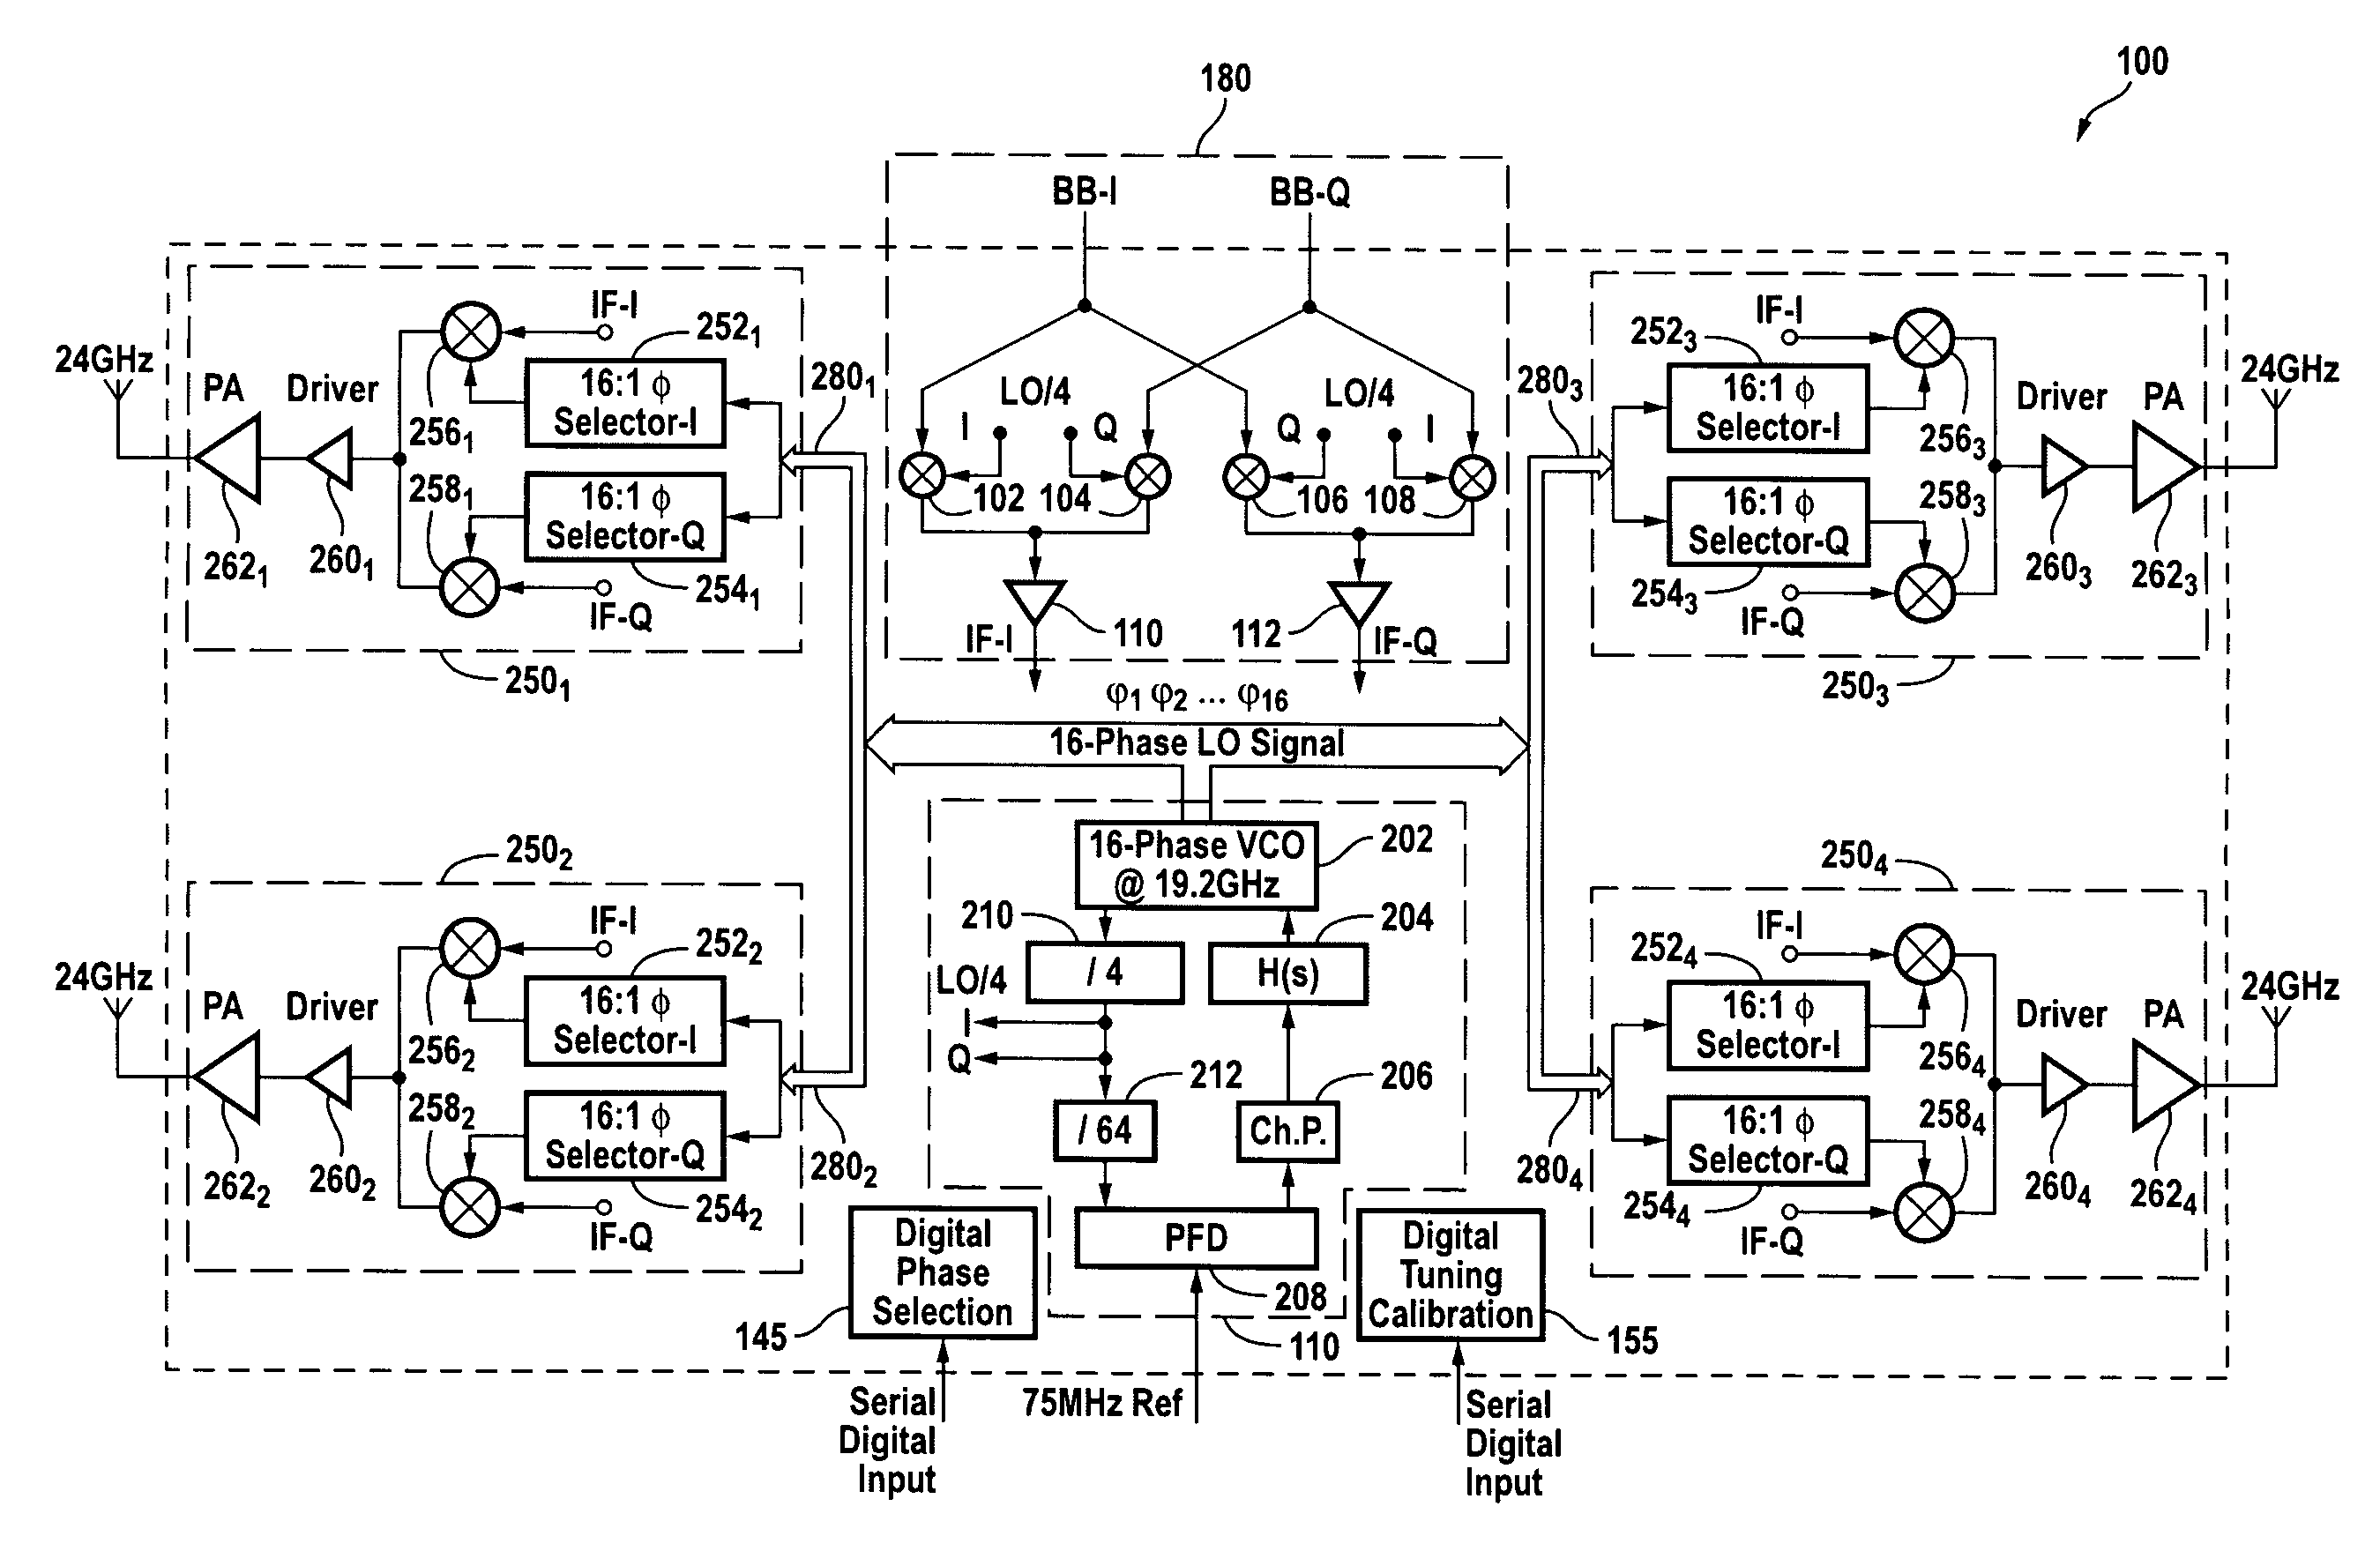 Multi-element phased array transmitter with LO phase shifting and integrated power amplifier